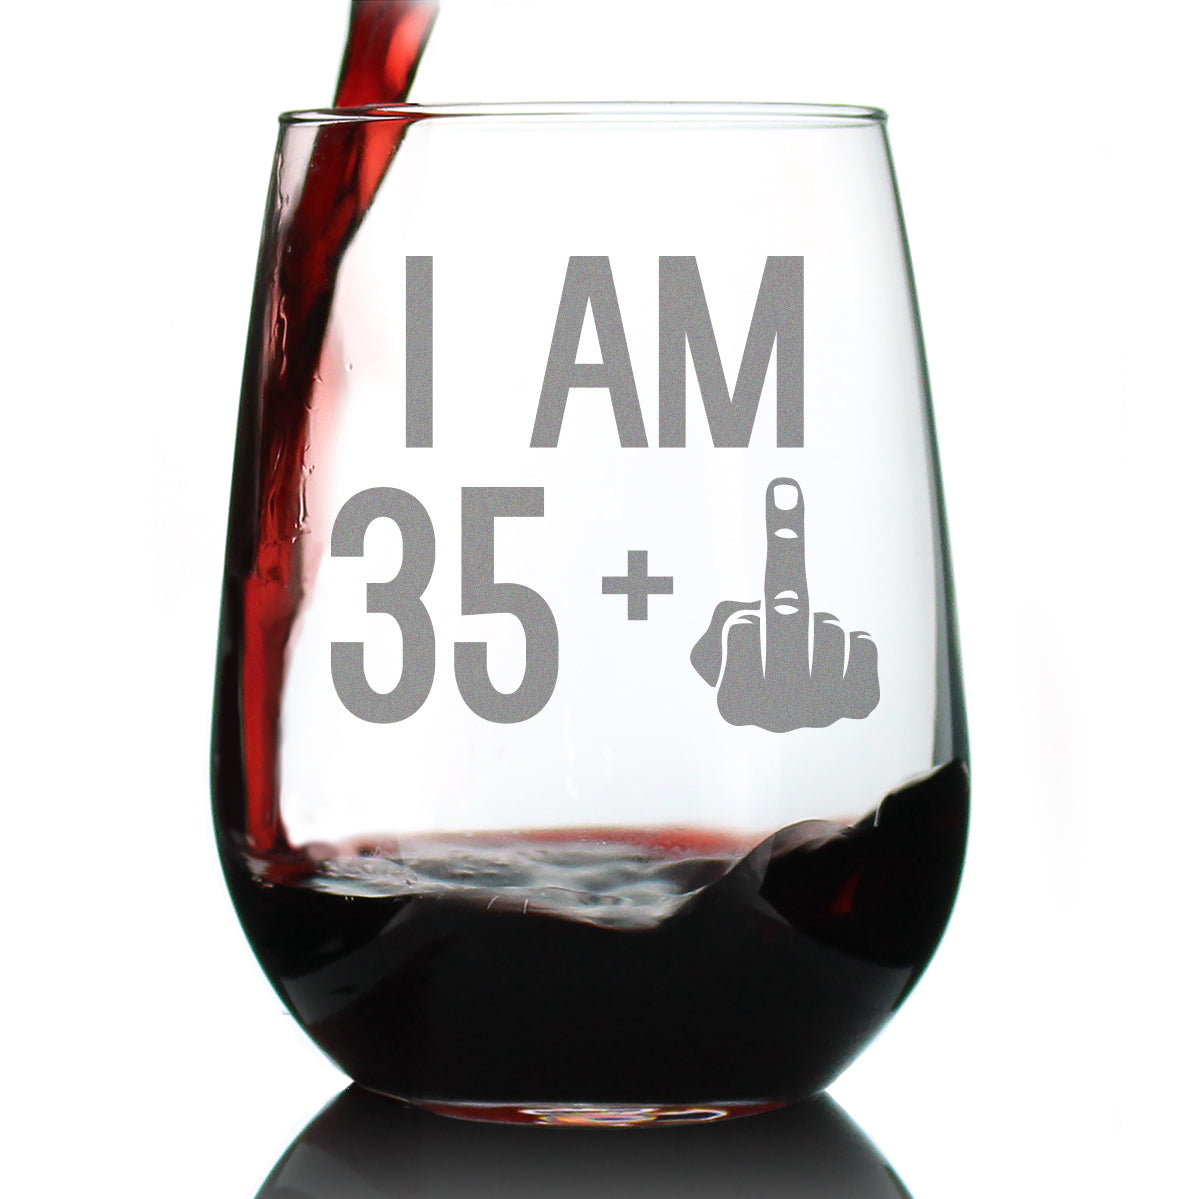 35 + 1 Middle Finger - 36th Birthday Stemless Wine Glass for Women &amp; Men - Cute Funny Wine Gift Idea - Unique Personalized Bday Glasses for Mom, Dad, Friend Turning 36 - Drinking Party Decoration